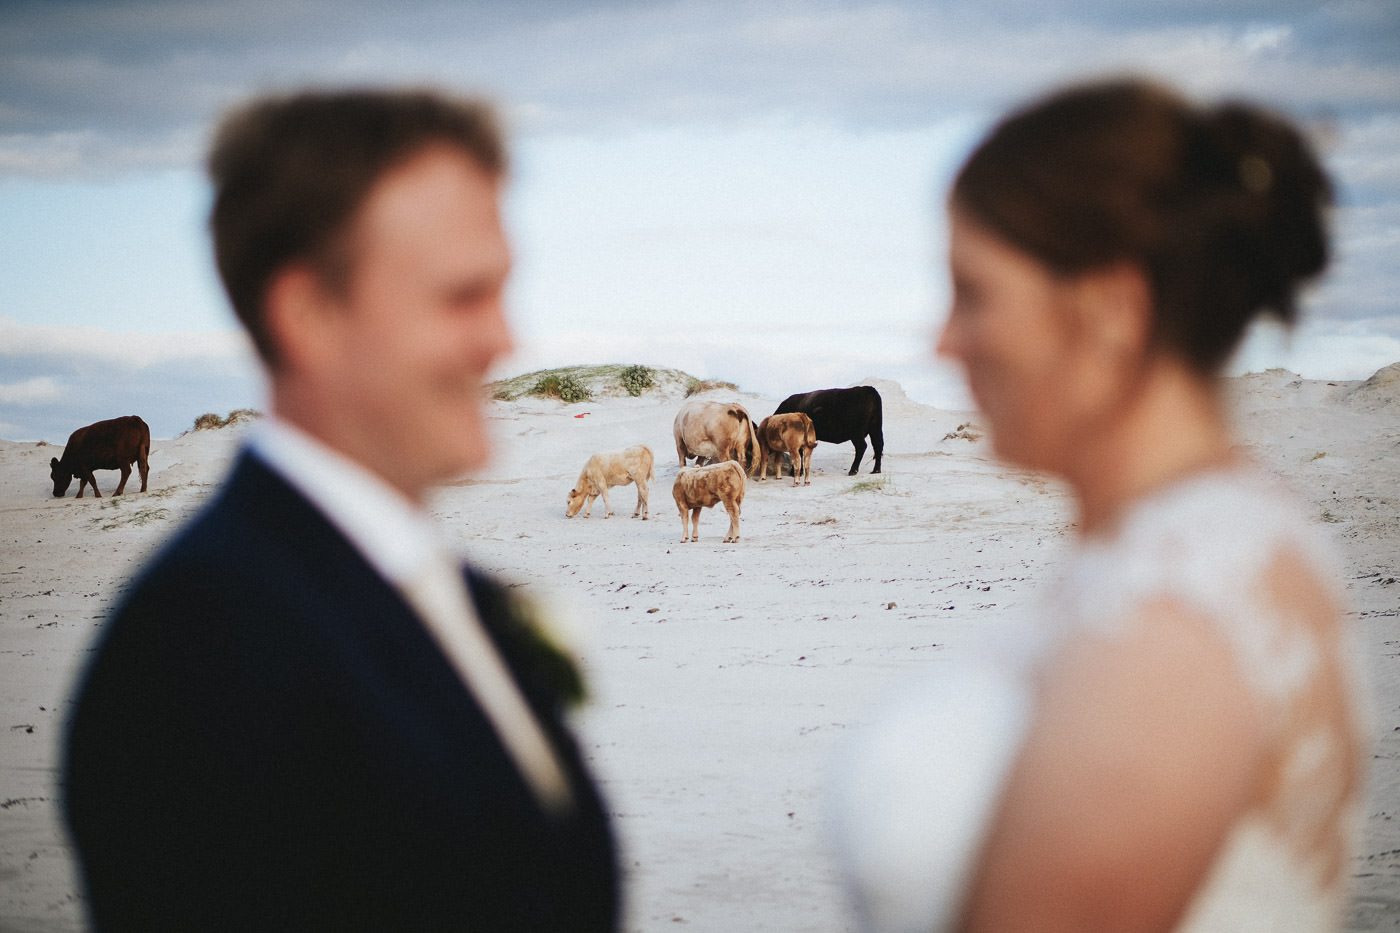 Bridal couple with cows on the beach in Ireland - the couple in the foreground out of focus, focus on the cows in the background, Dog's Bay, Connemara Ireland - wedding photographer Ireland, Brautrausch